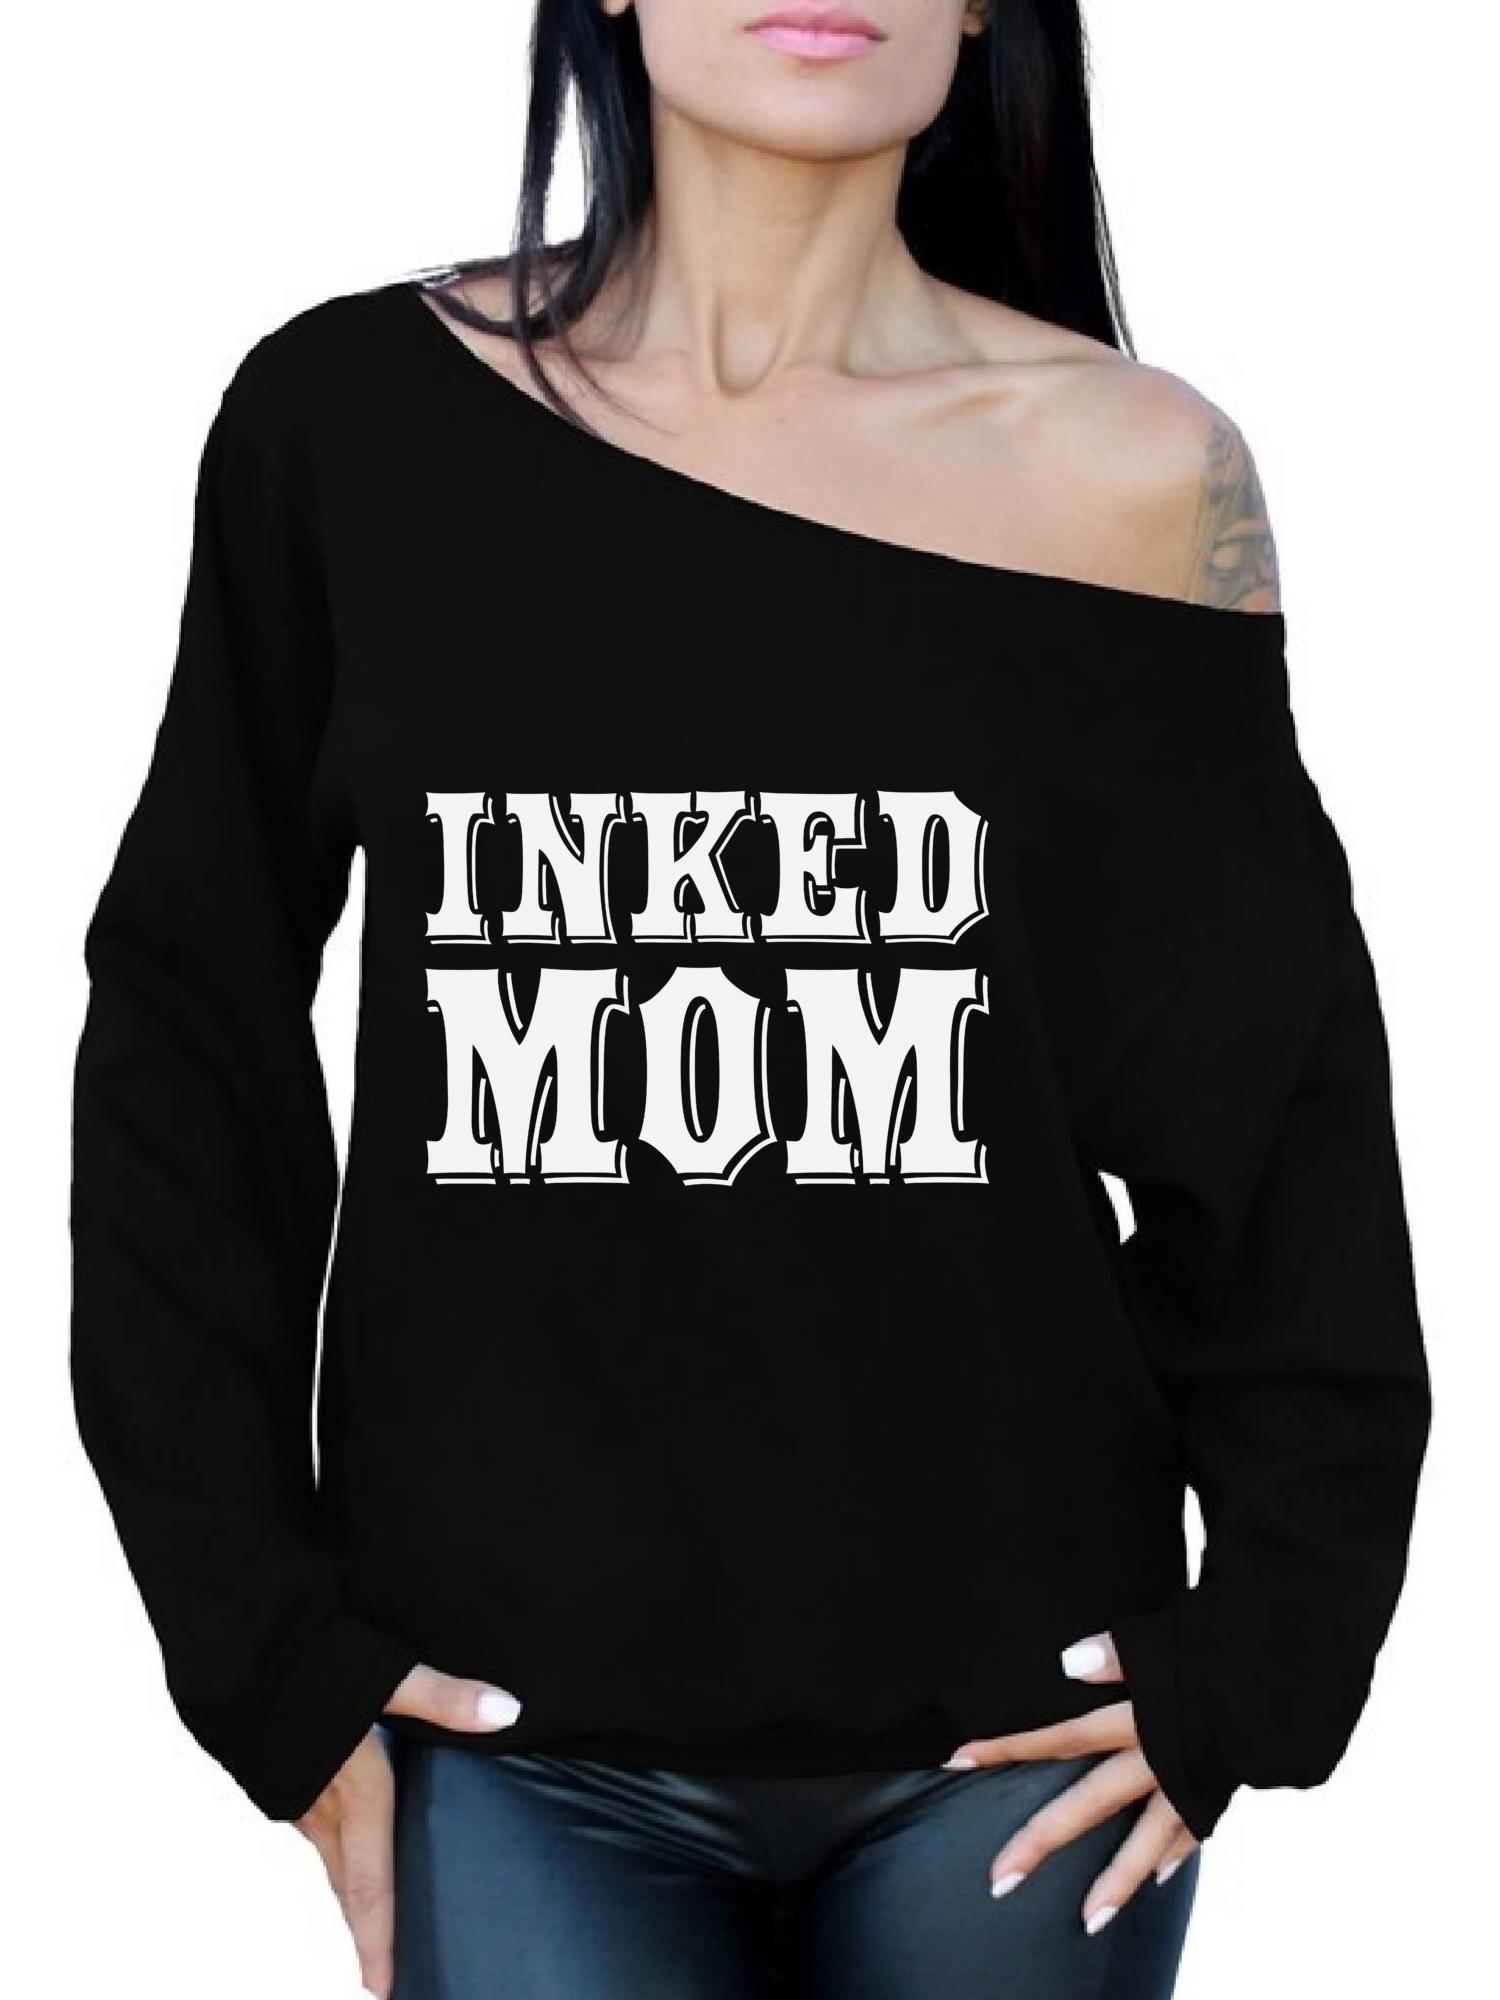 Inked Mom Oversized Sweater Cool Gifts for Mom. Tattooed Mom Off Shoulder Sweatshirt